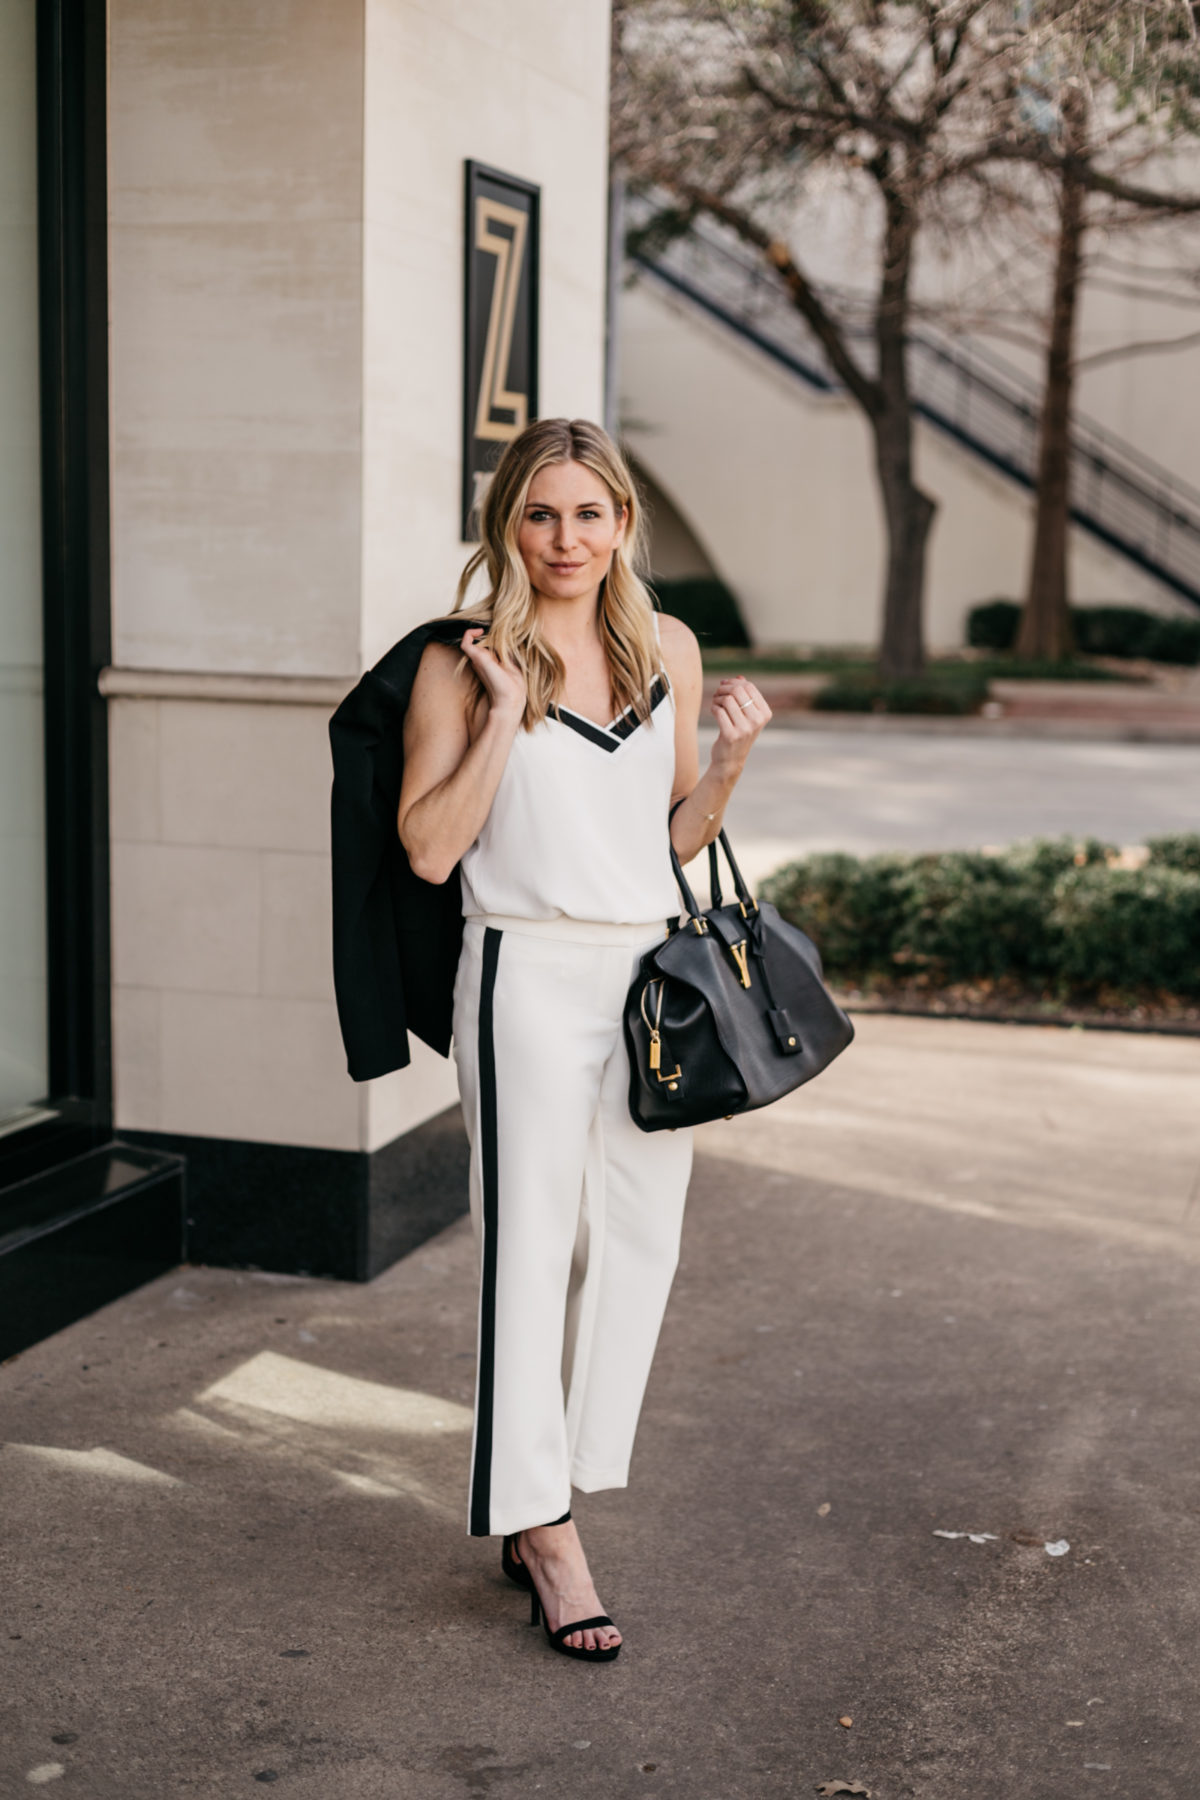 OUTFIT 4  White Work Pants // White with Black Sleeveless Camisole // Black Fitted Blazer // Black Work Tote // Black Suede Sandals